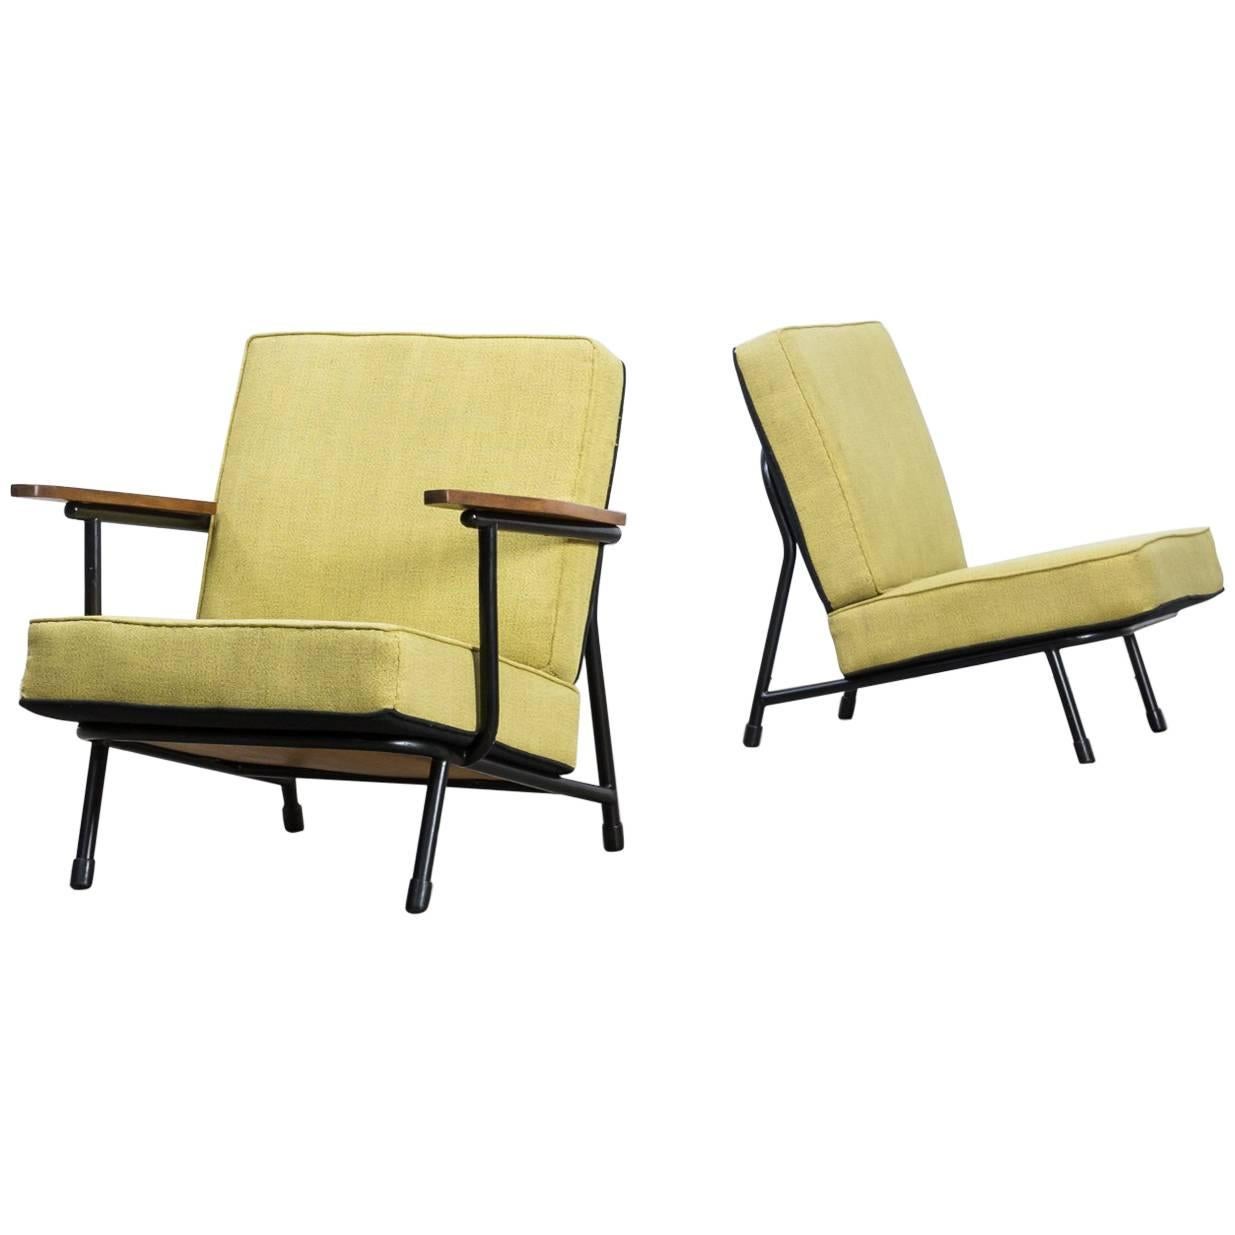 1950s Alf Svensson ‘013’ Low Back Chairs for DUX, Set of Two For Sale